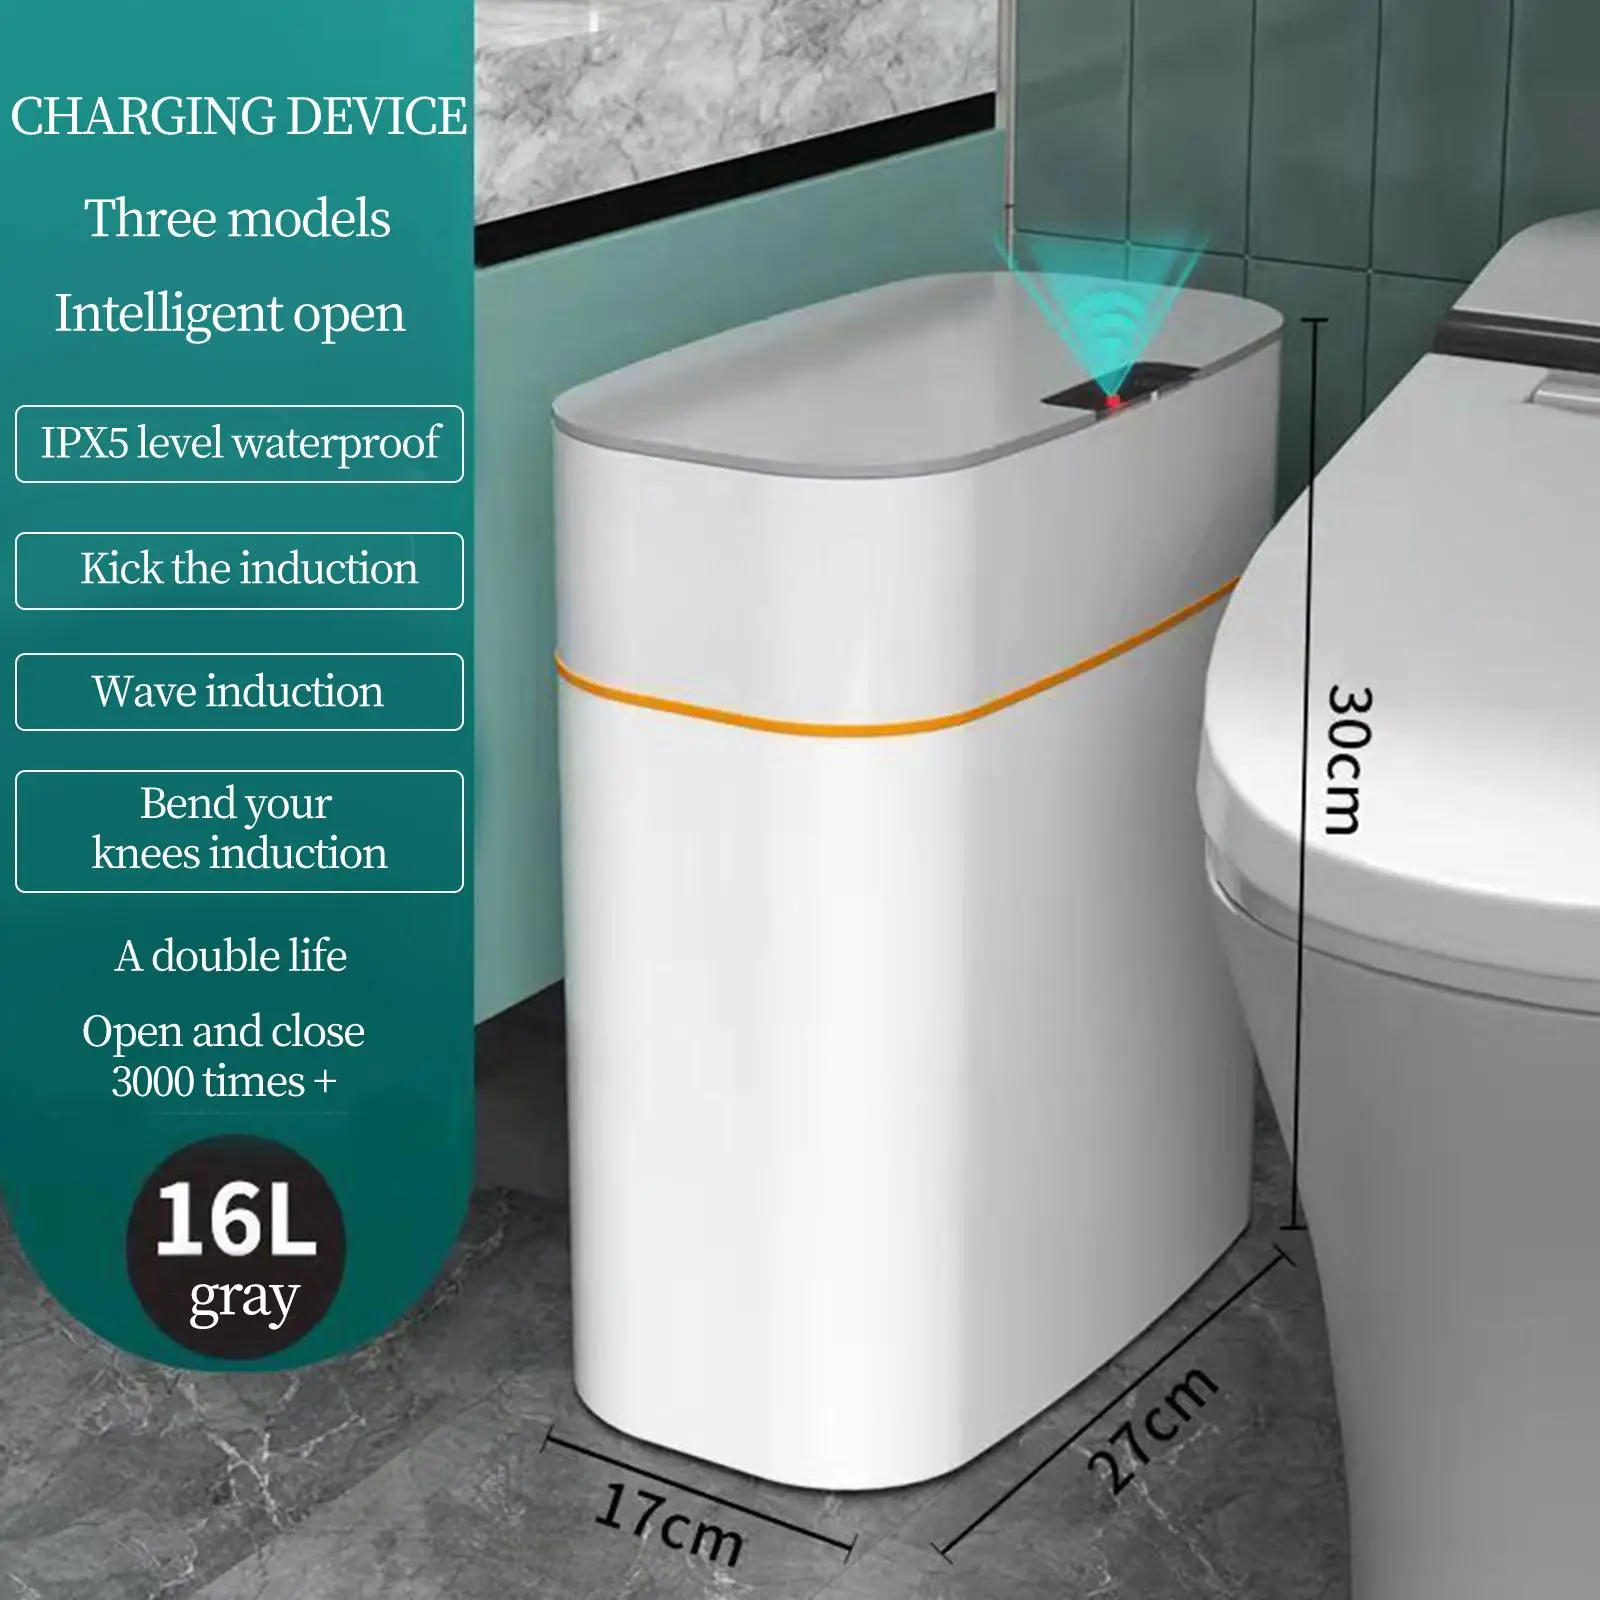 Automatic Smart Trash Can Electric Wastebasket Waterproof for Toilet Office